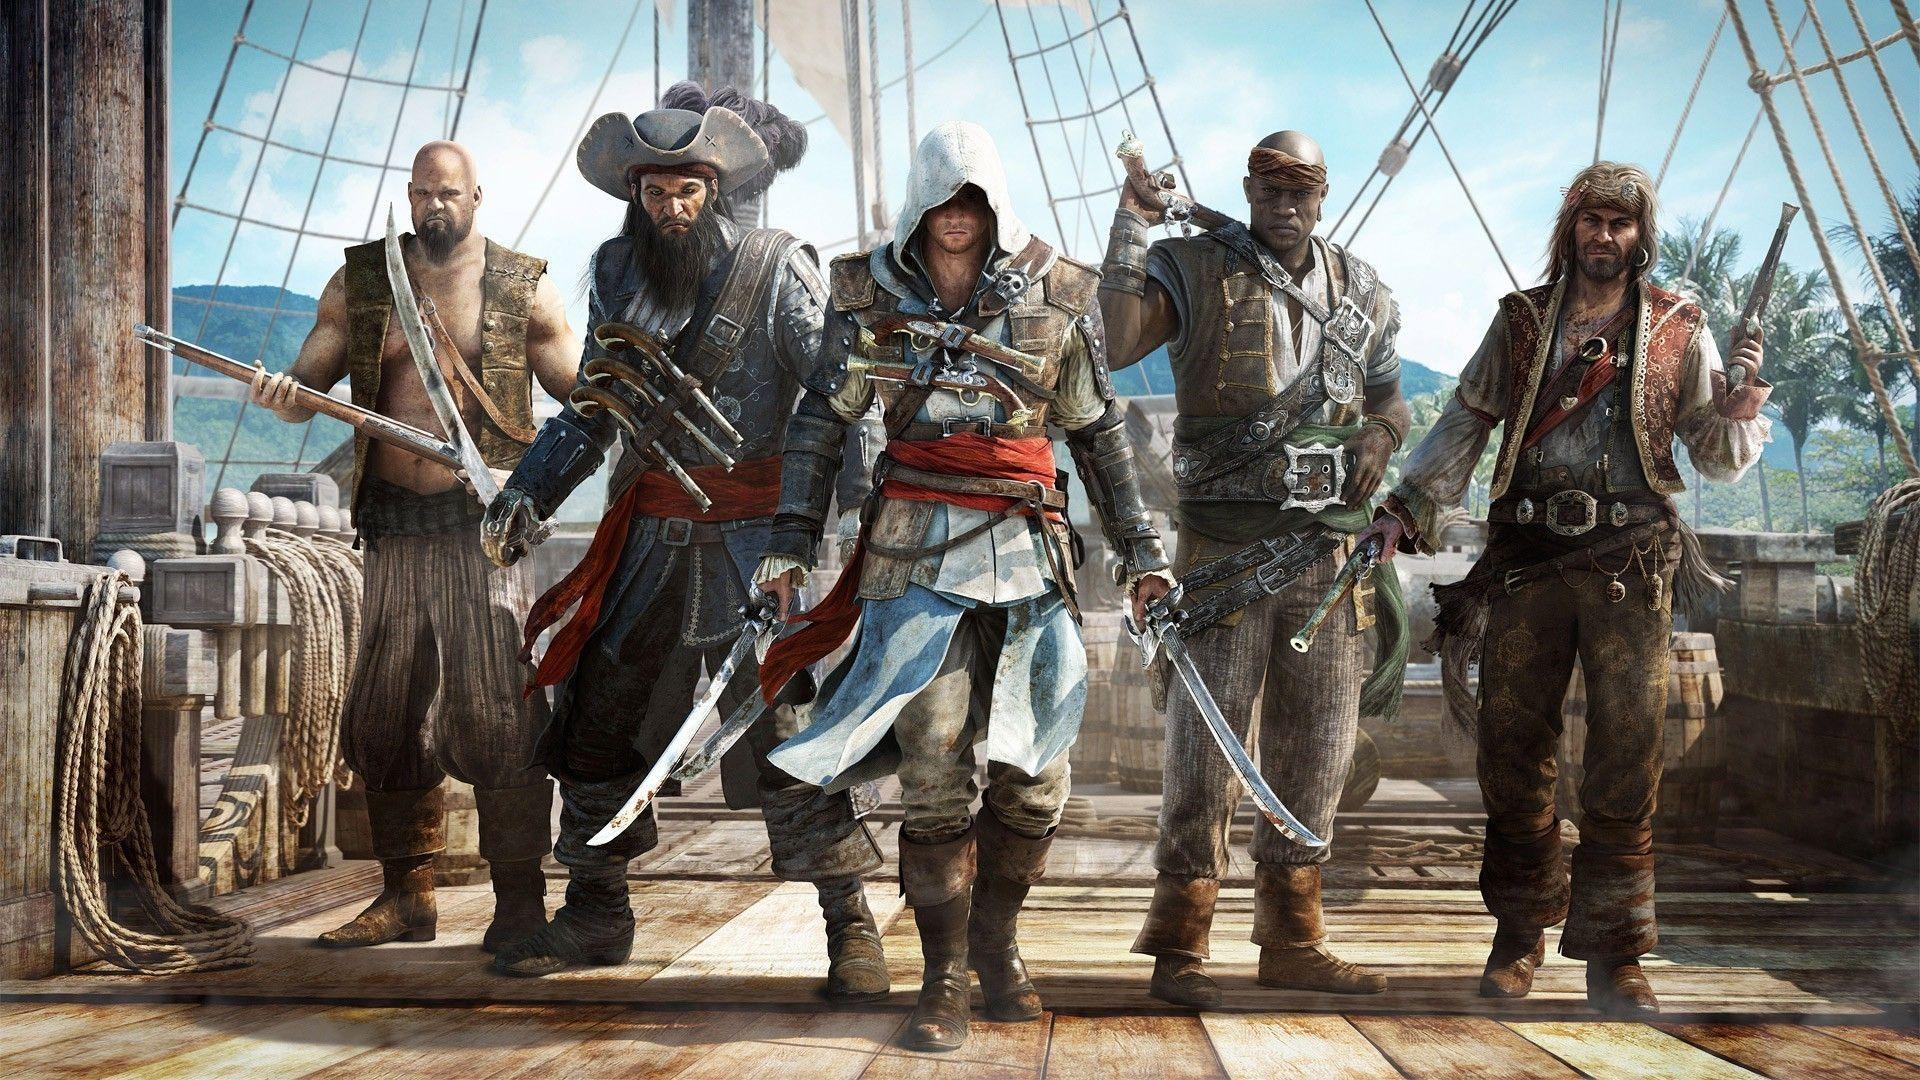 assassin creed 4 pc game free download full version